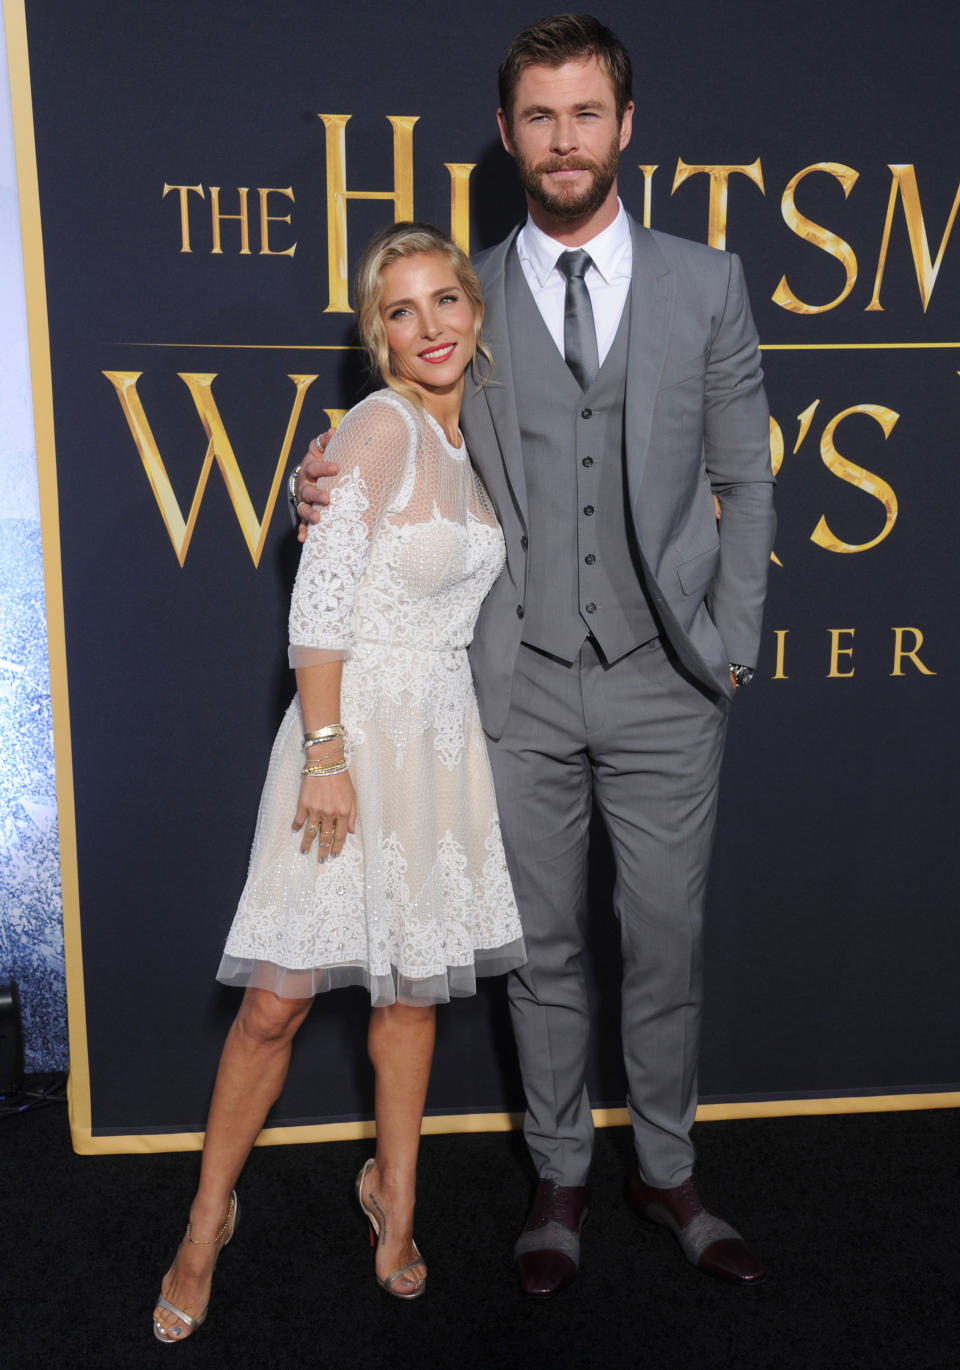 They’ve been dubbed as one of the power couples of Hollywood, but it hasn’t always been smooth sailing for Elsa Pataky and Chris Hemsworth. Source: Getty